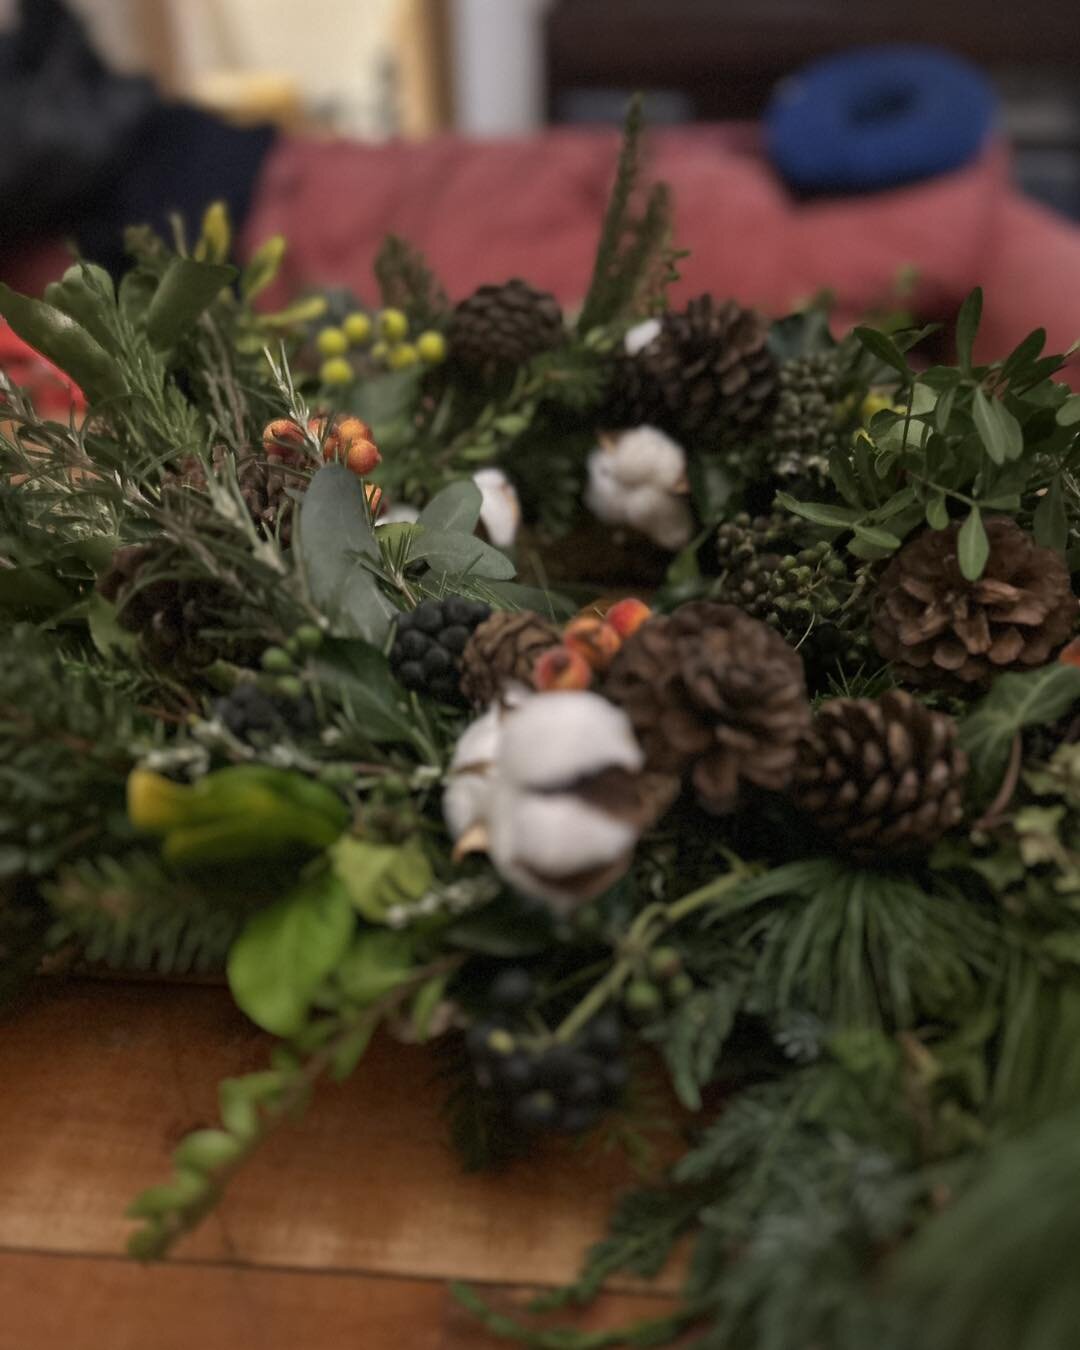 Lovely evening with Jackie from Mill Blossom Flowers making Christmas wreaths.